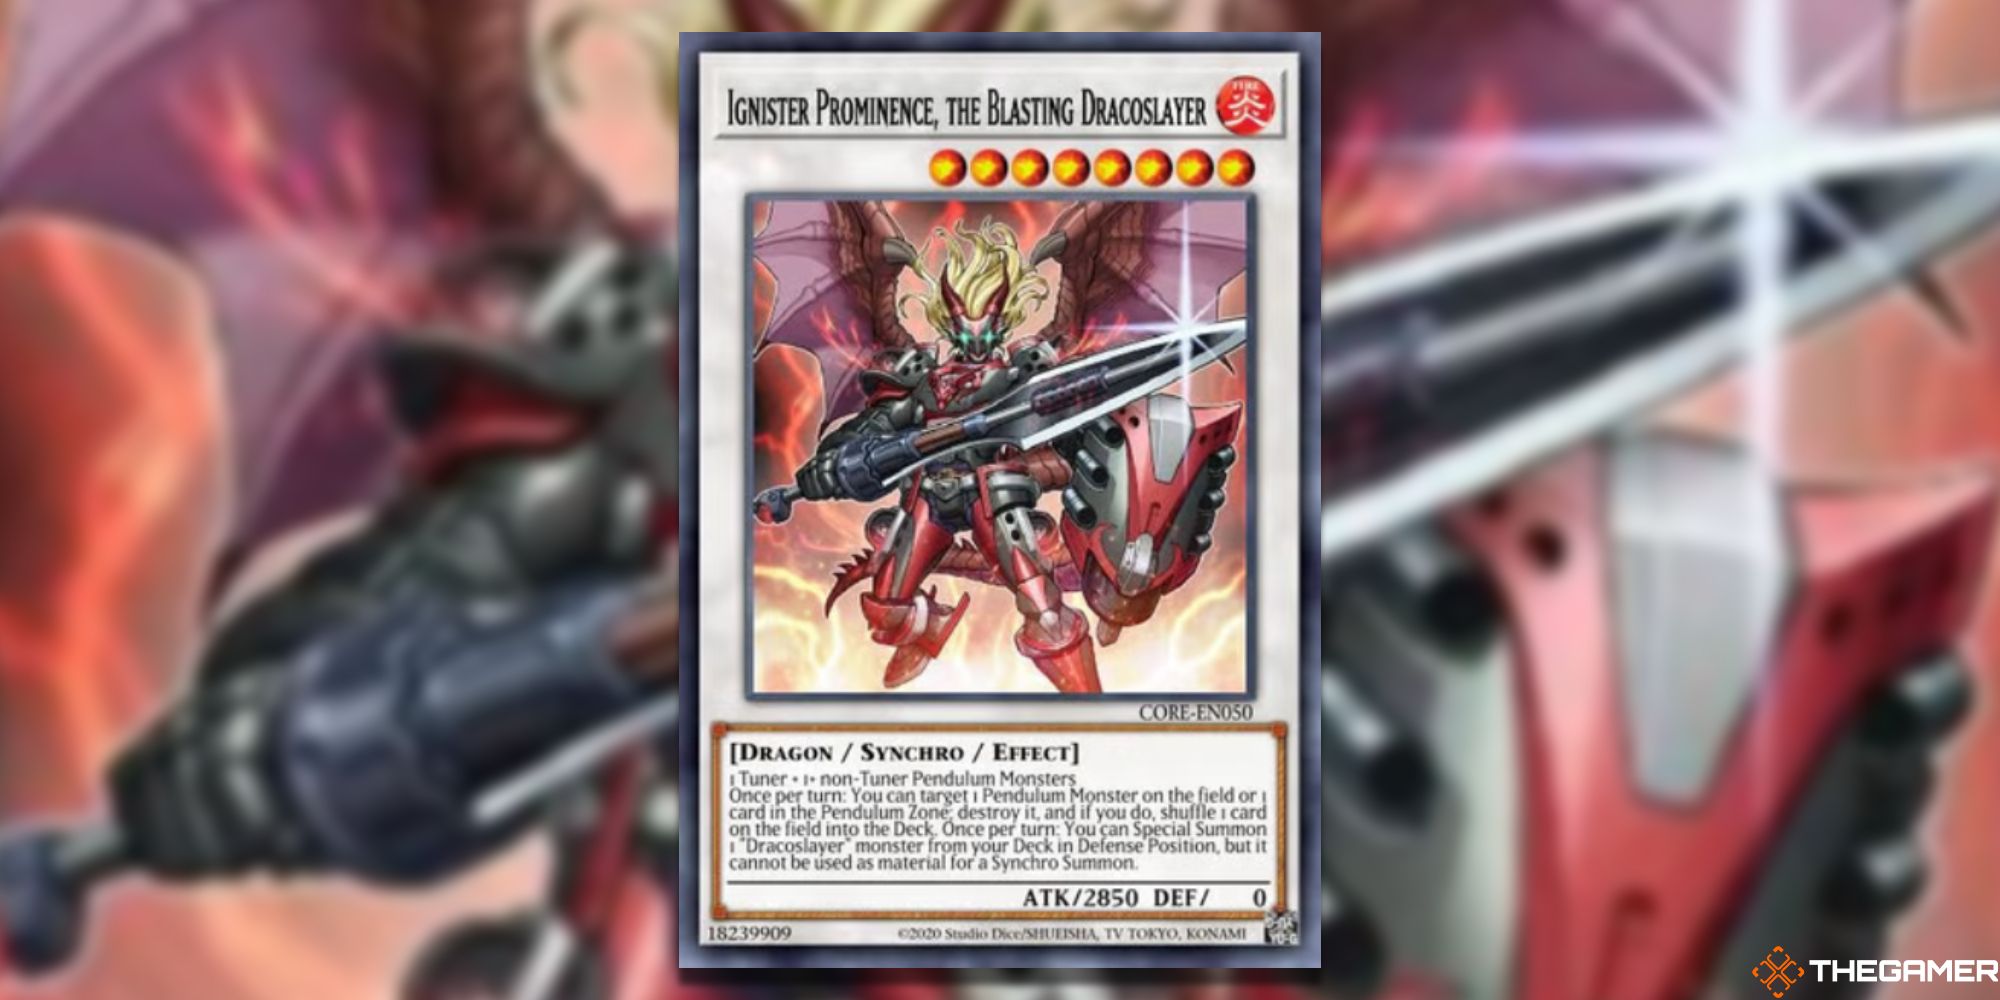 Yu-Gi-Oh! Ignister Prominence, The Blasting Dracoslayer on blurred background